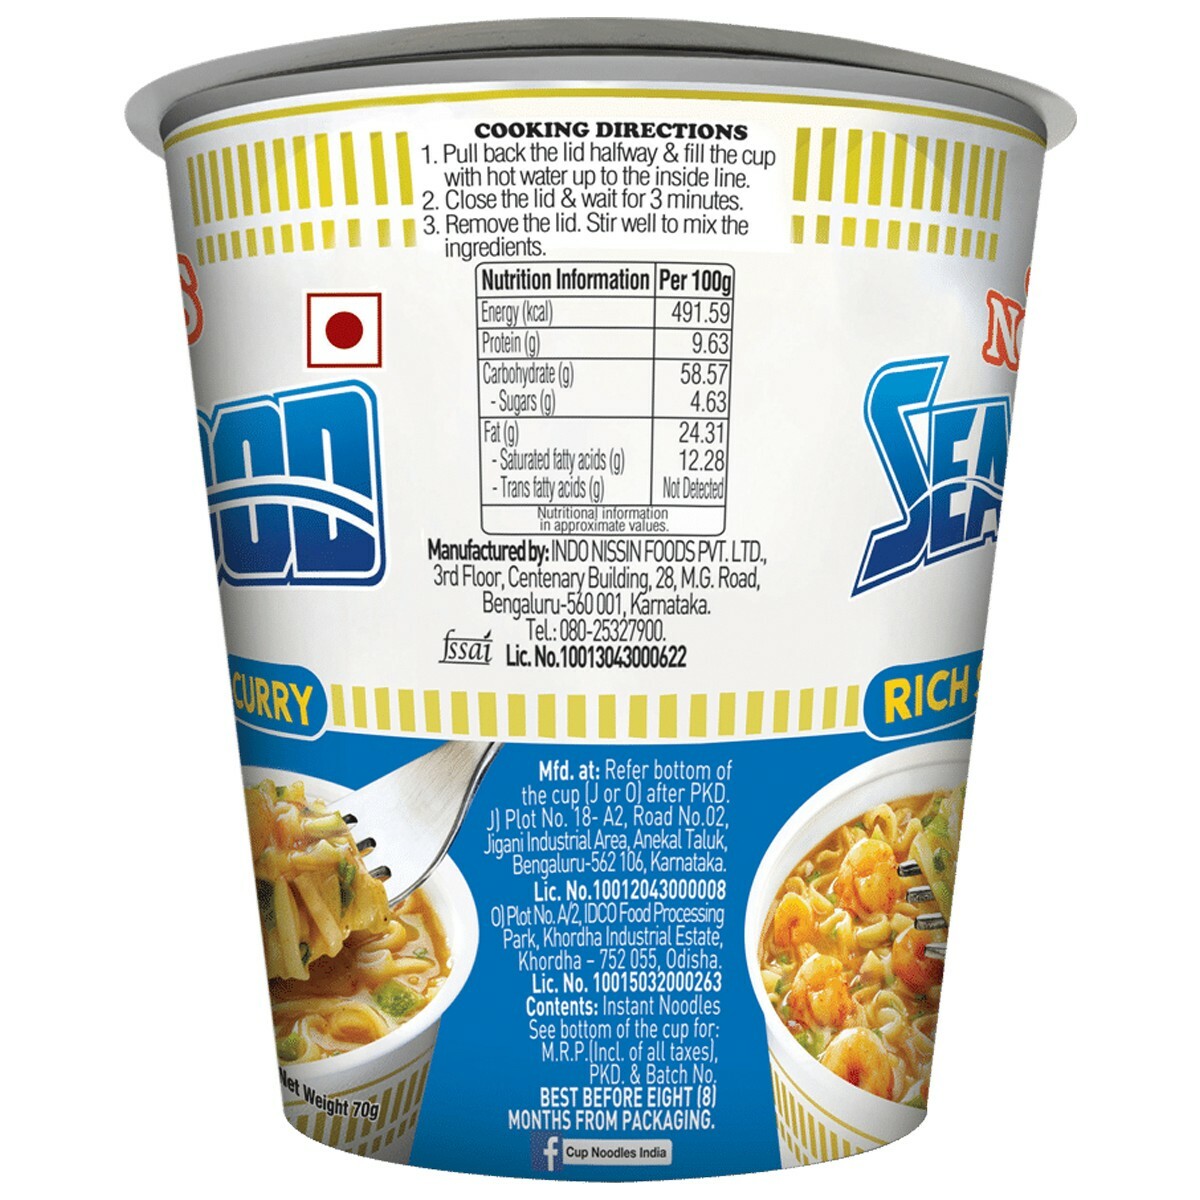 Cup Noodles Seafood 70g